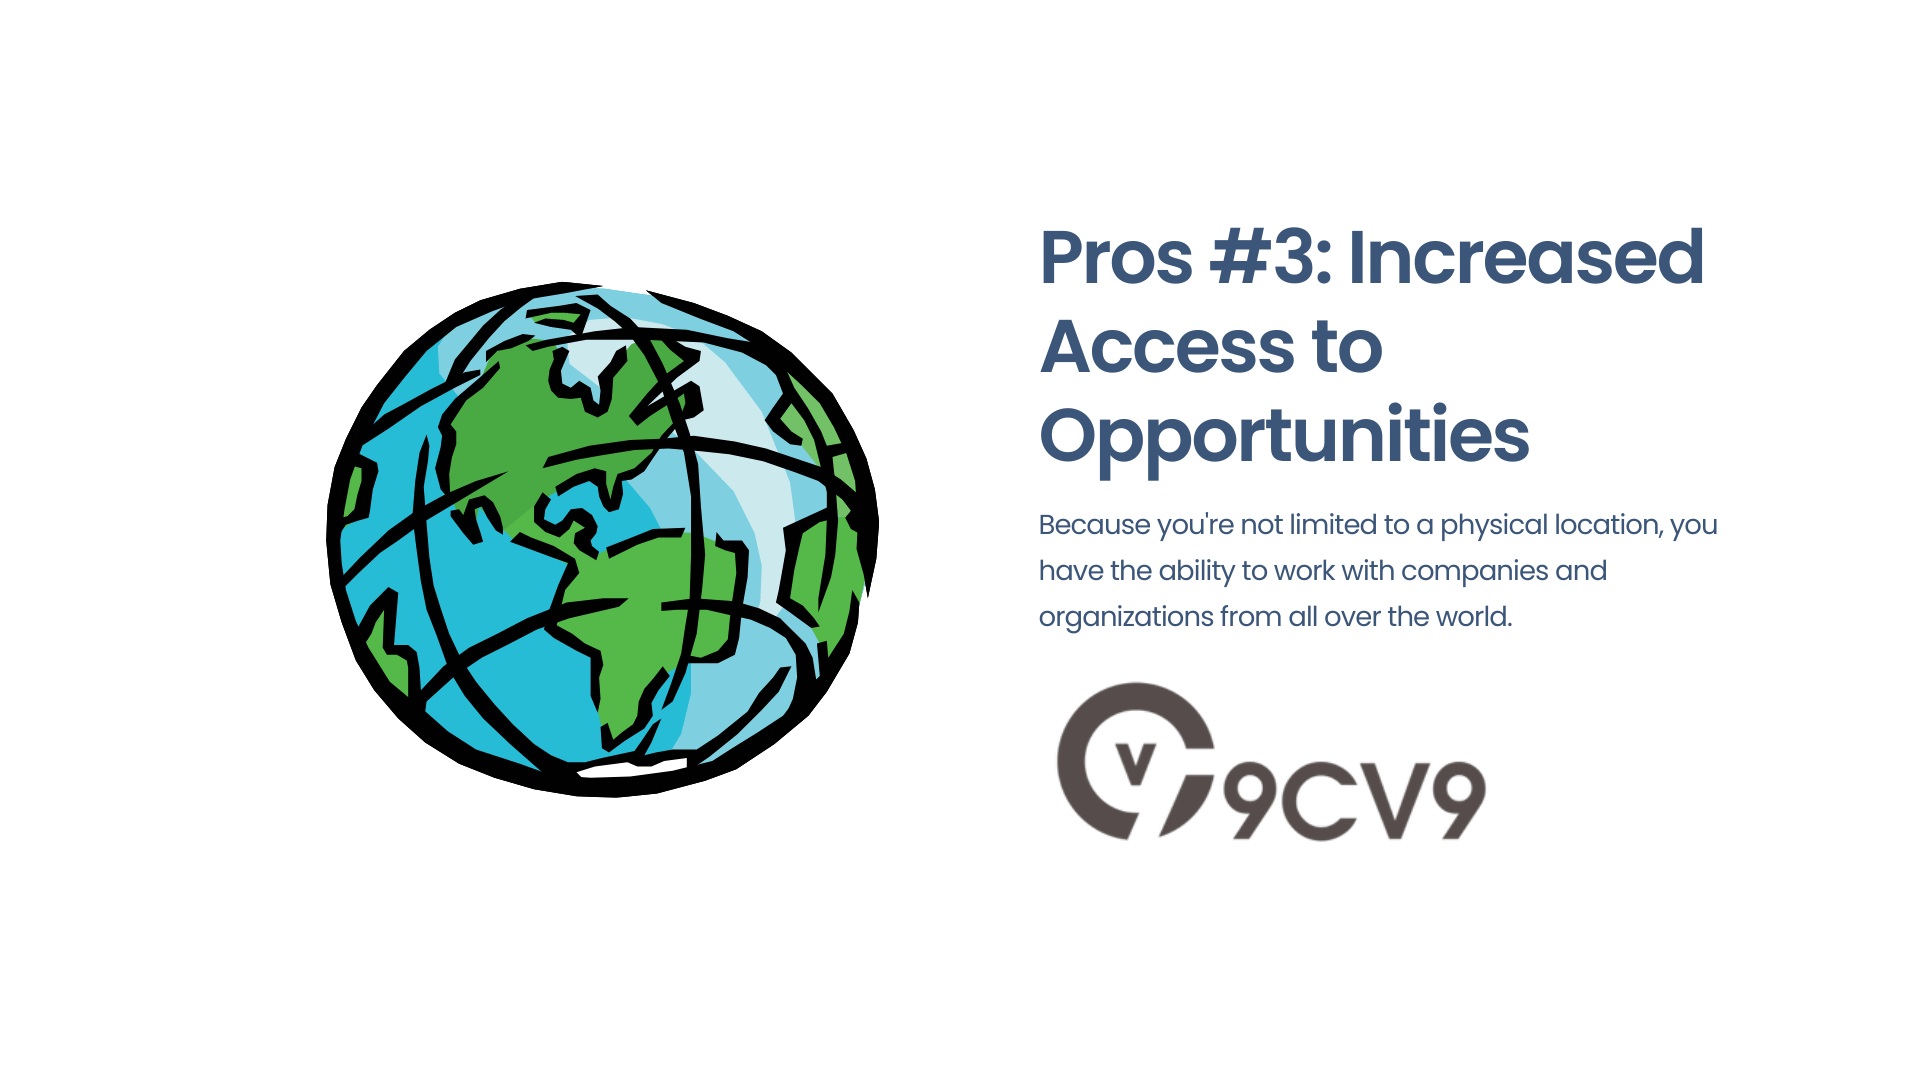 Pros #3: Increased Access to Opportunities